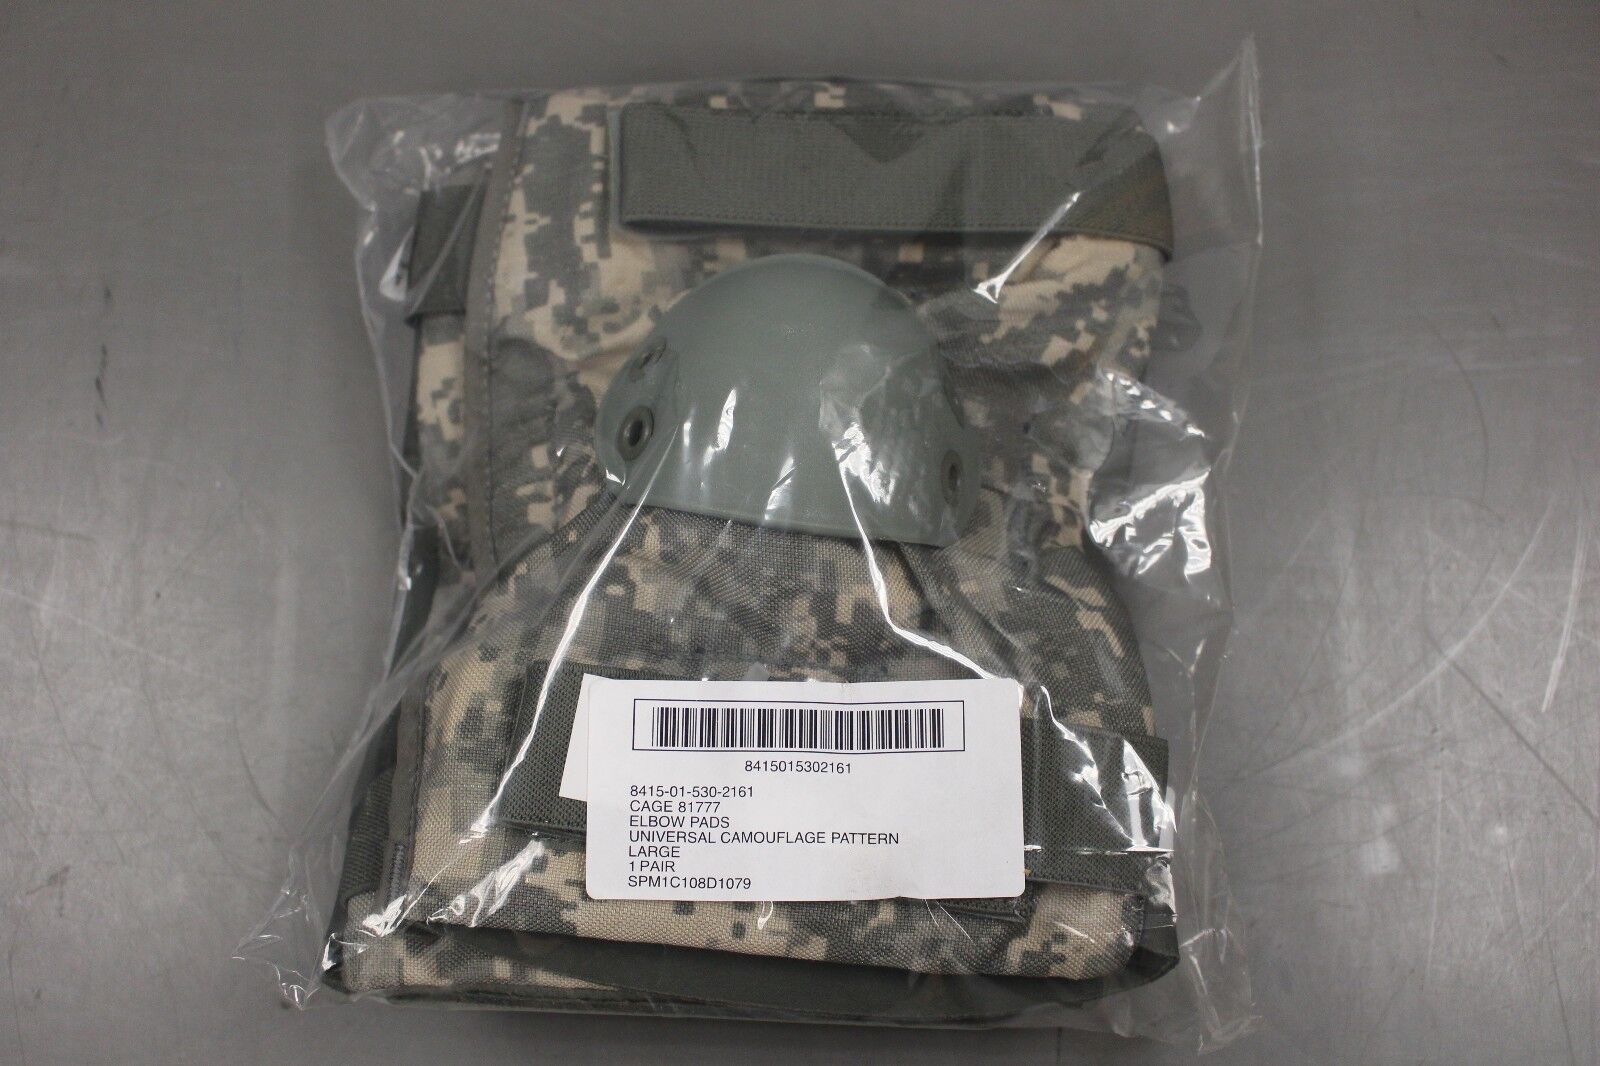 Set of Military ACU Elbow Pads, Size: Large, NSN: 8415-01-530-2161, Brand New